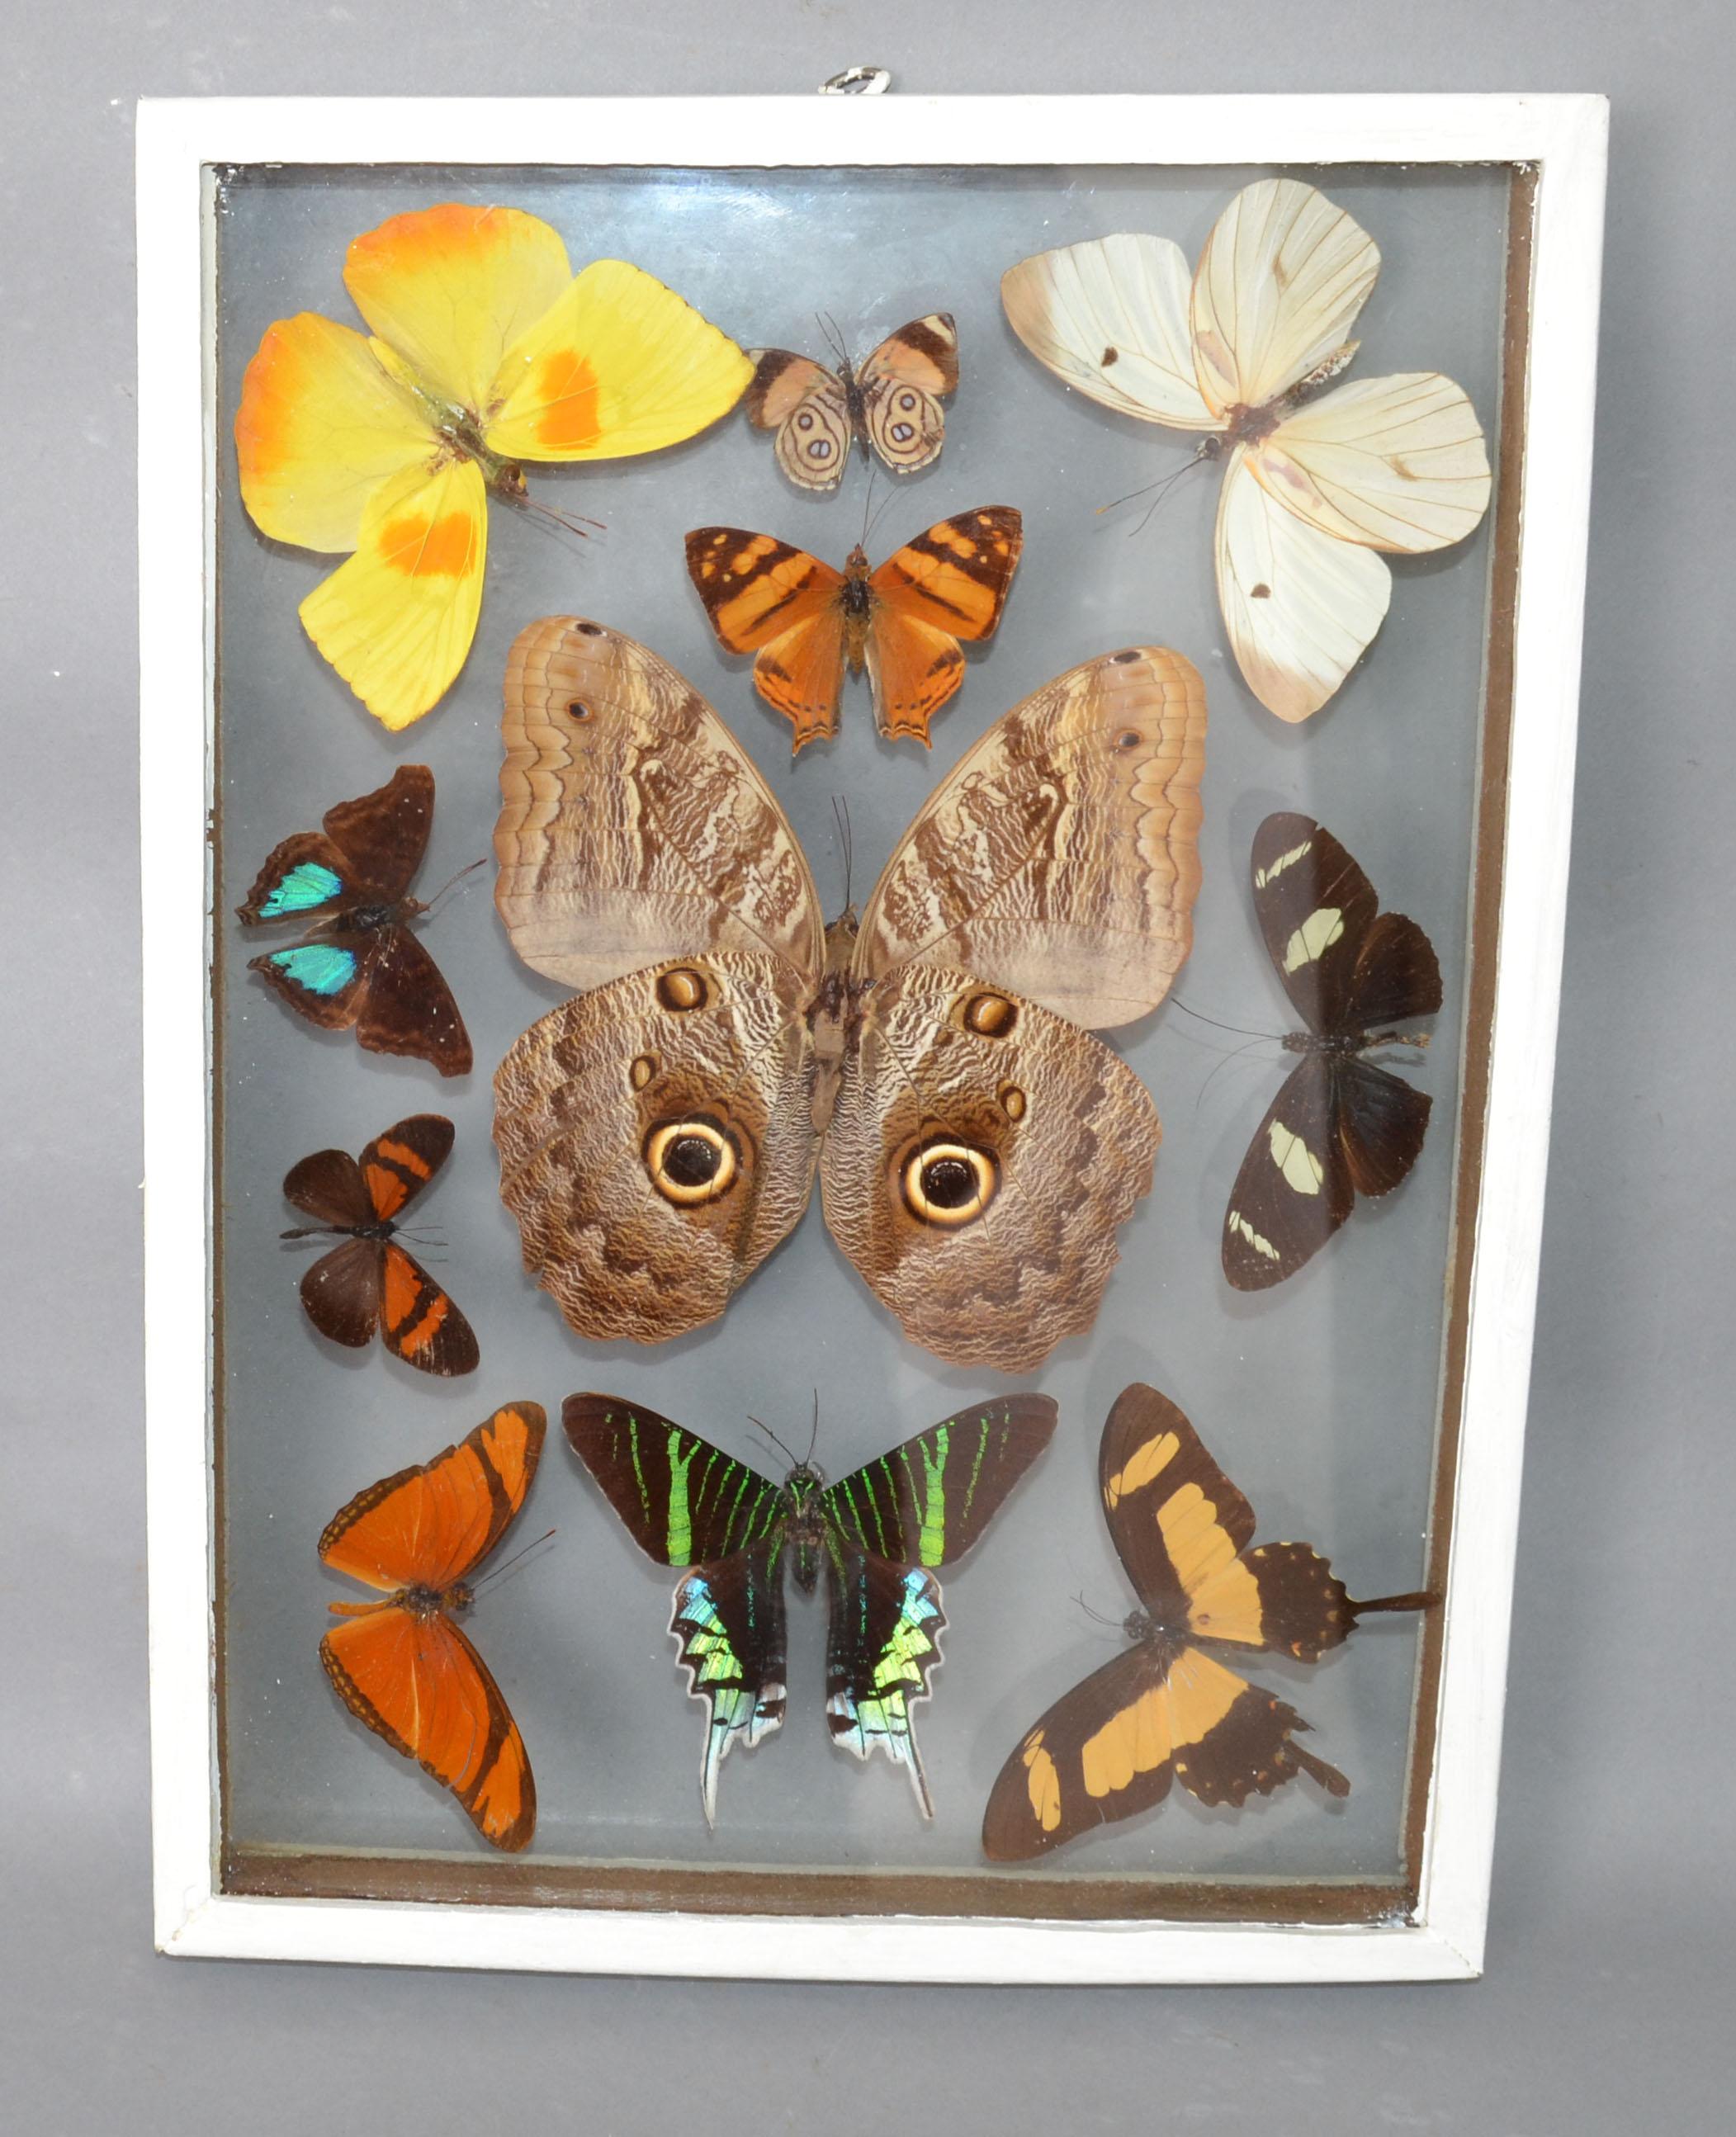 Mid-Century Modern glass box frame with Butterflies, American, circa 1960.
Good vintage condition to the Reverse of Frame.
Great for teaching Nature and Animals.